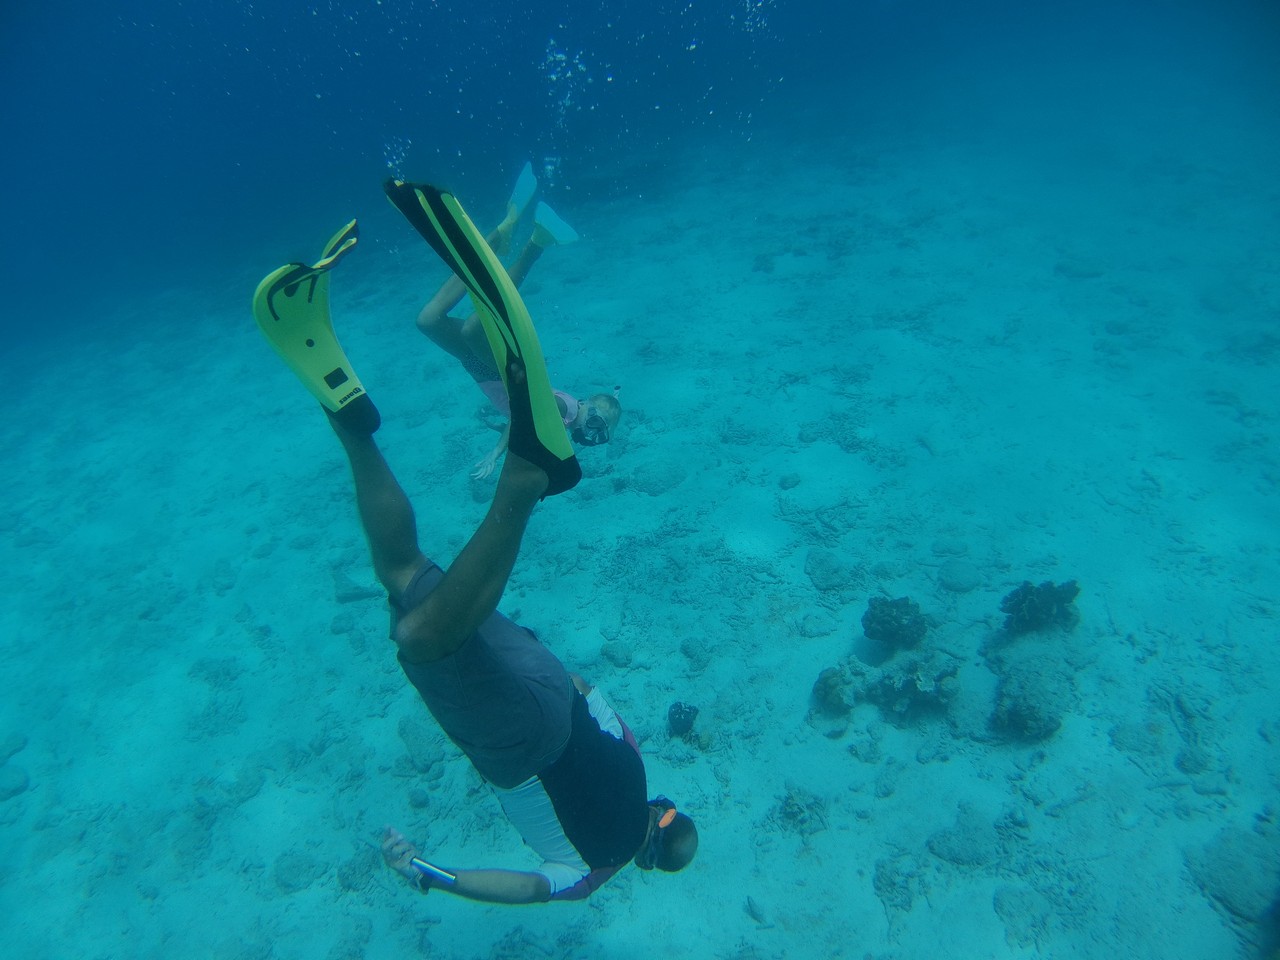 The freediving is proving to be quite successful.